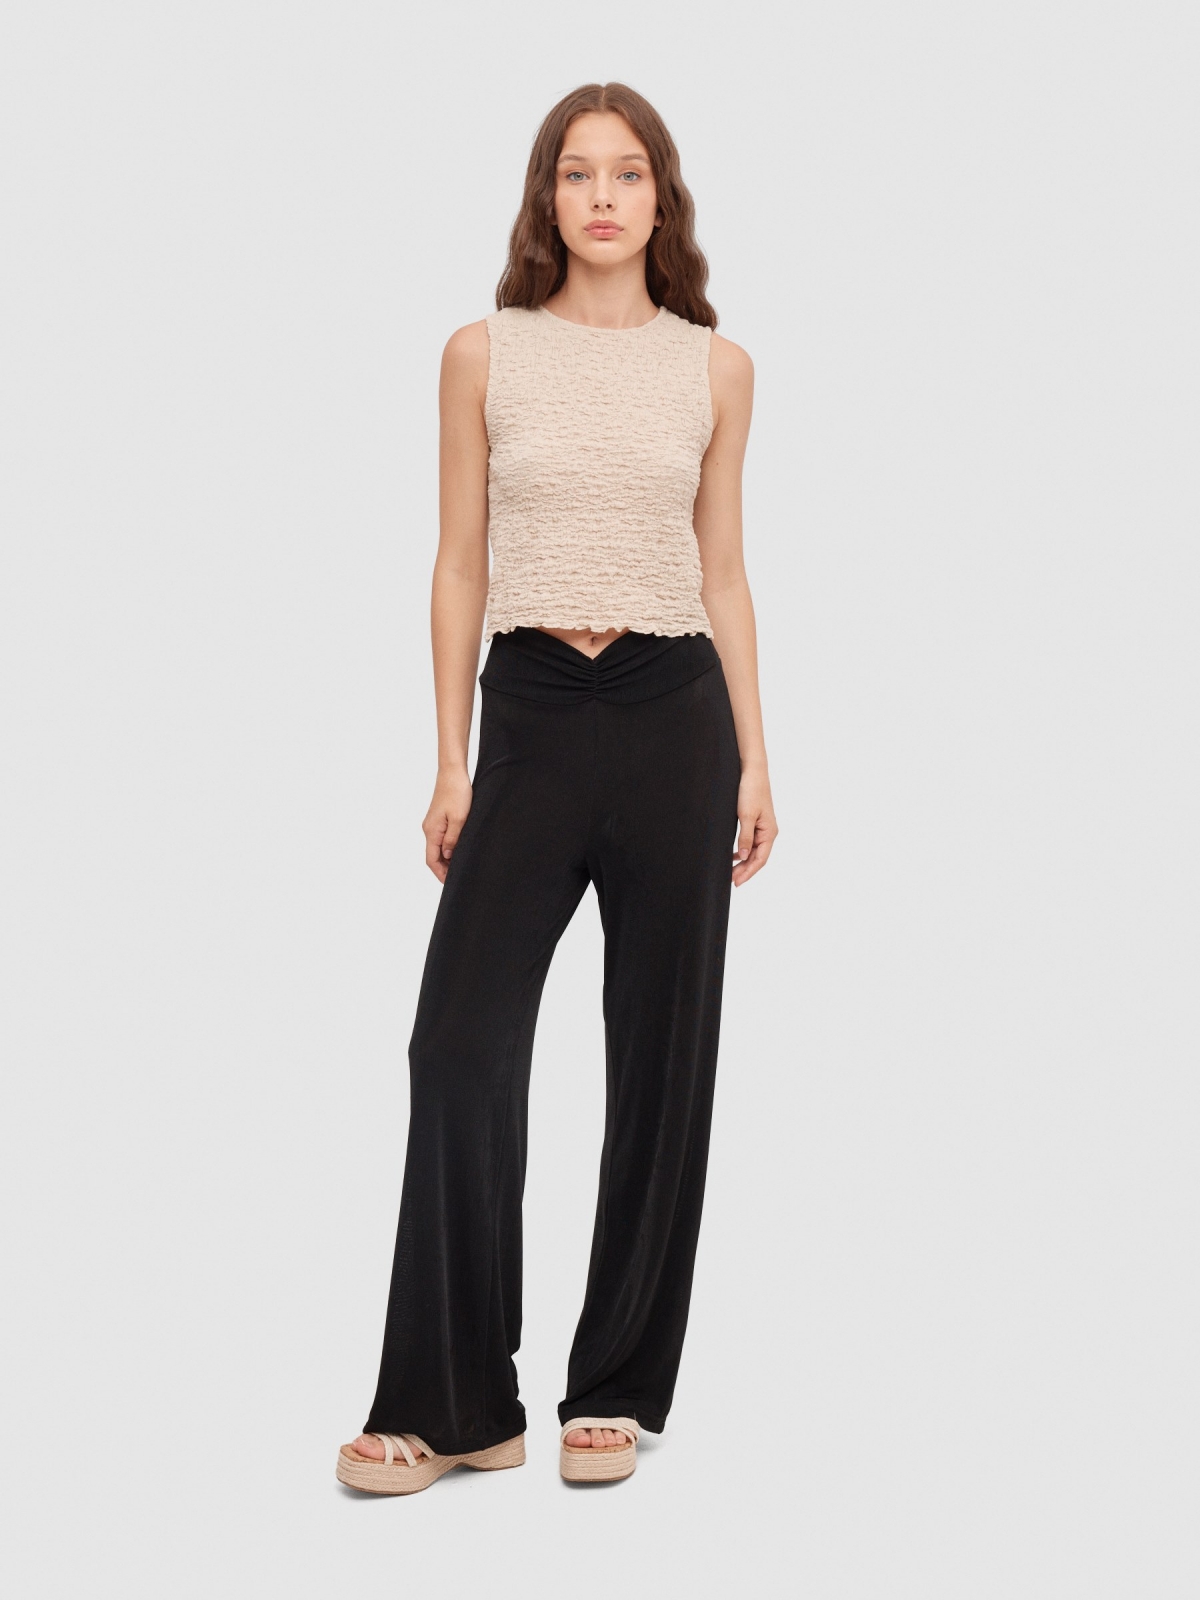 Ruched culotte trousers black front view